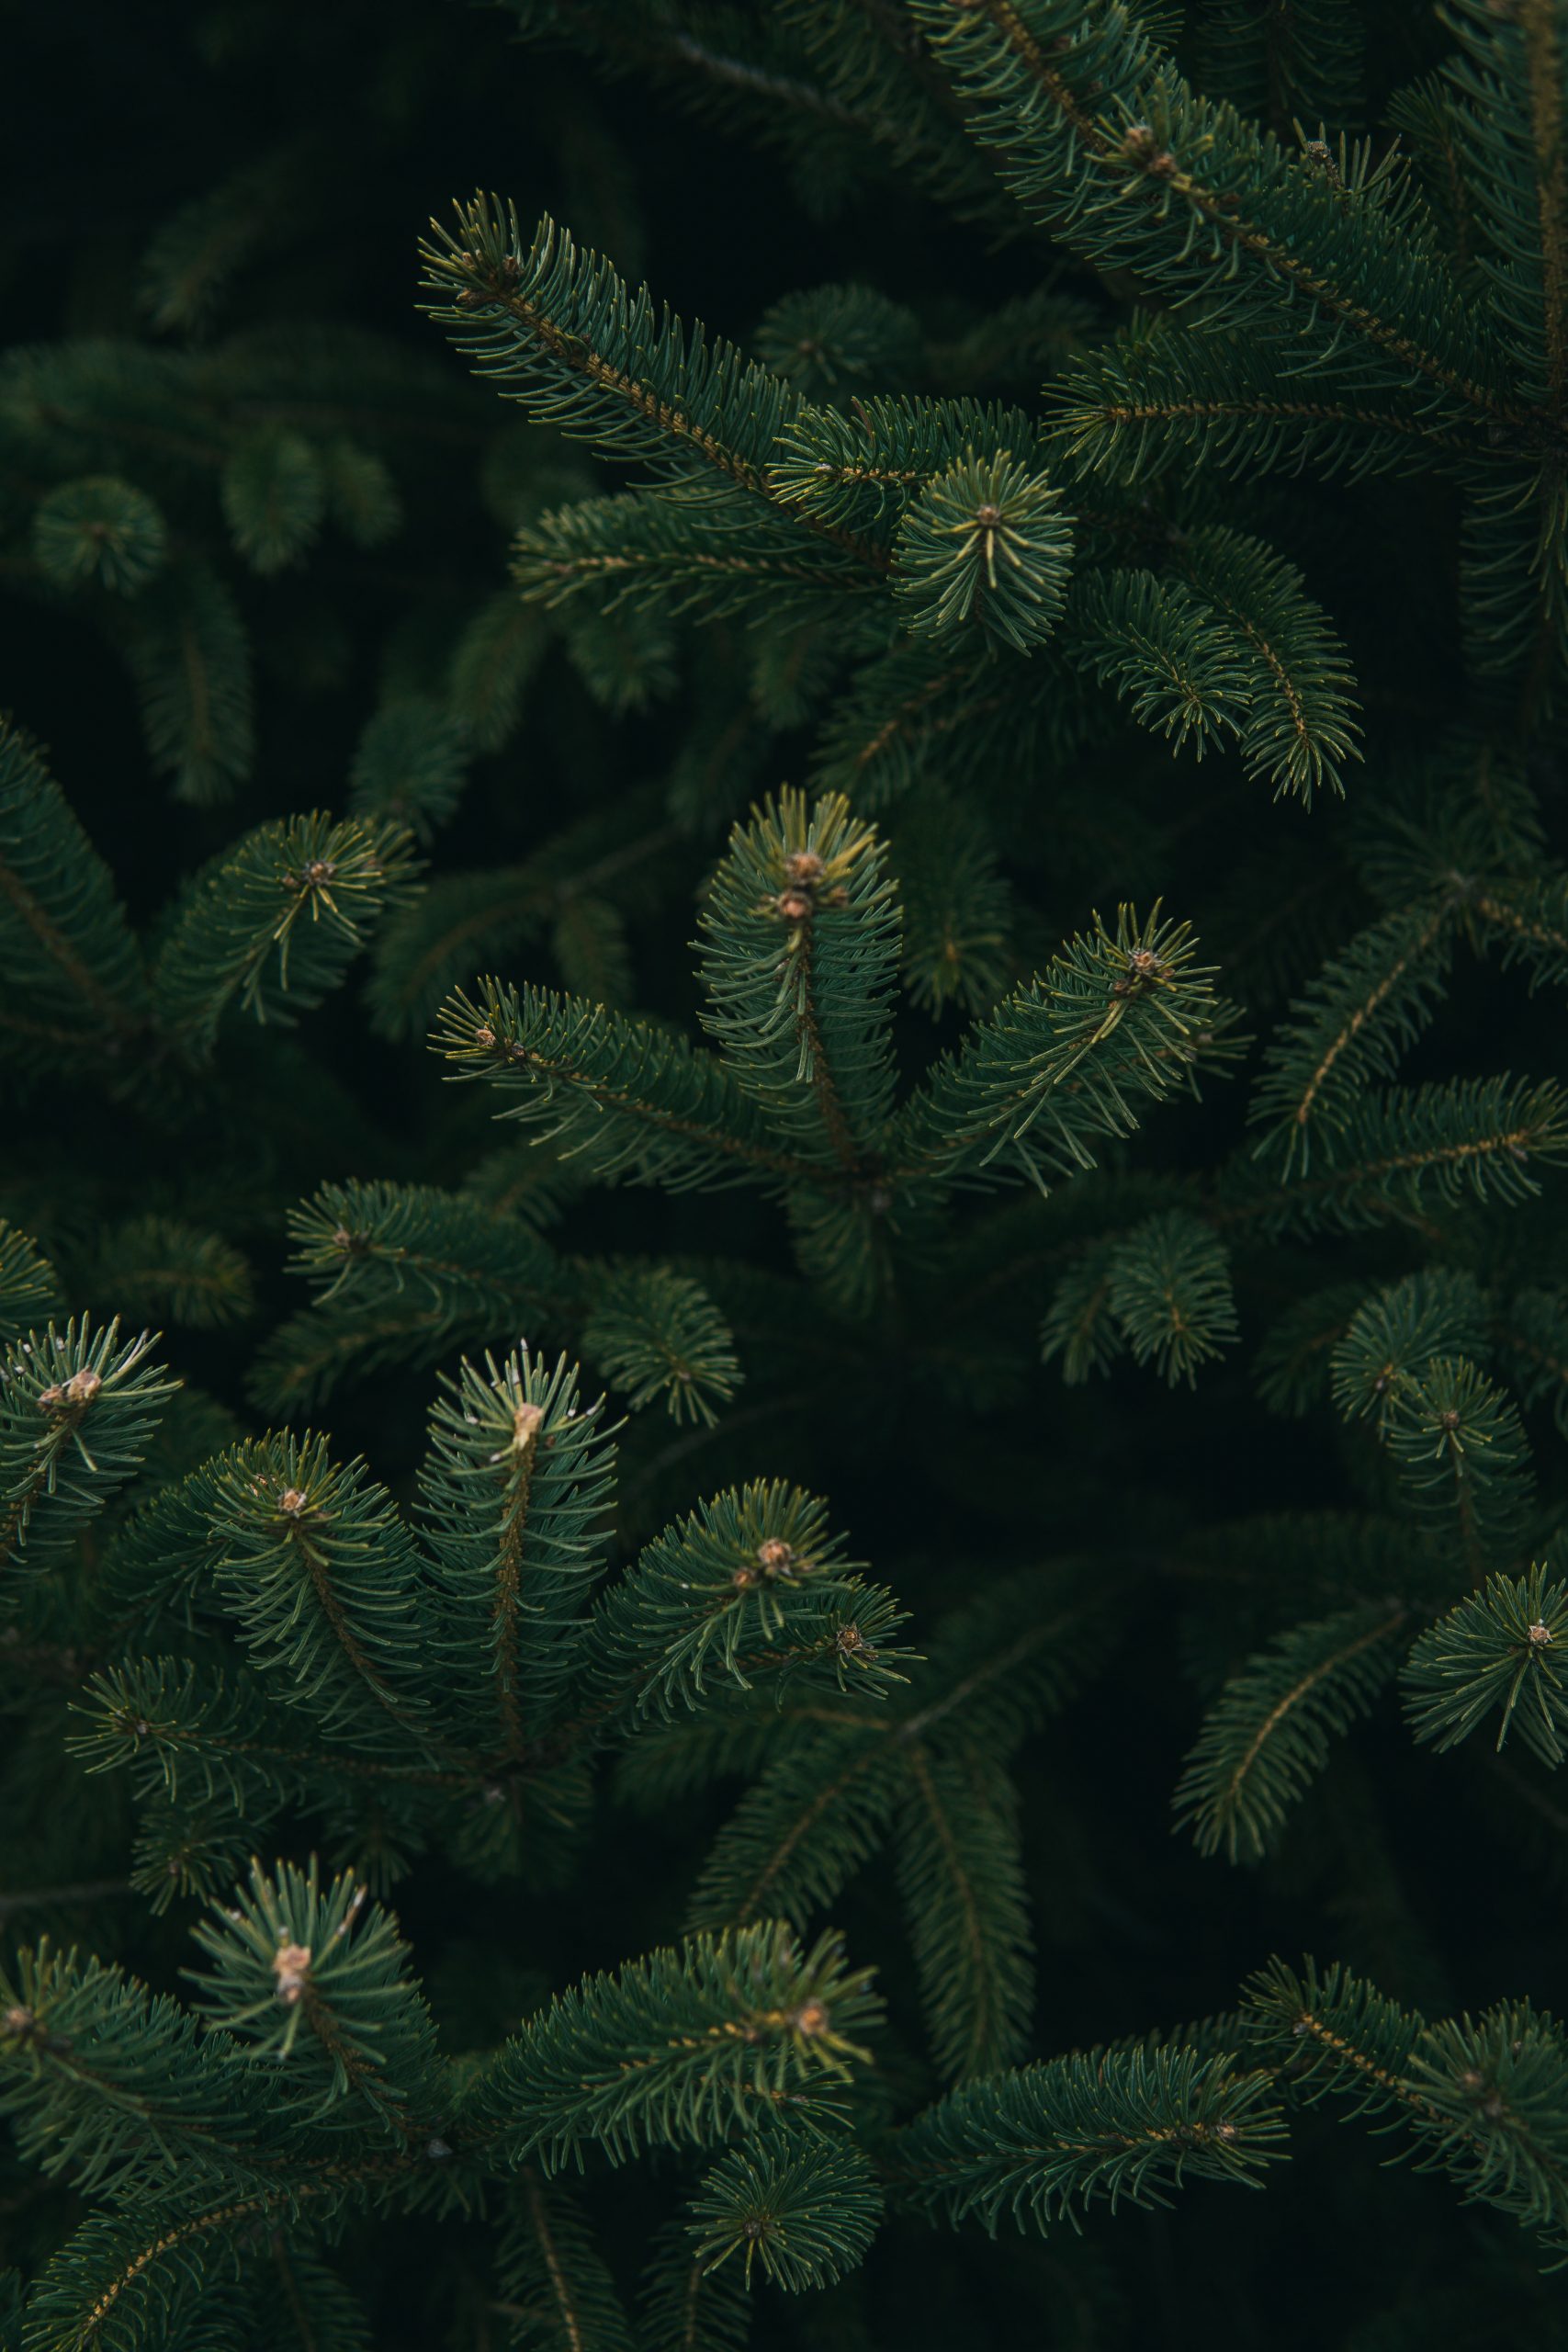 an up close picture of vibrant, green pine trees branches \